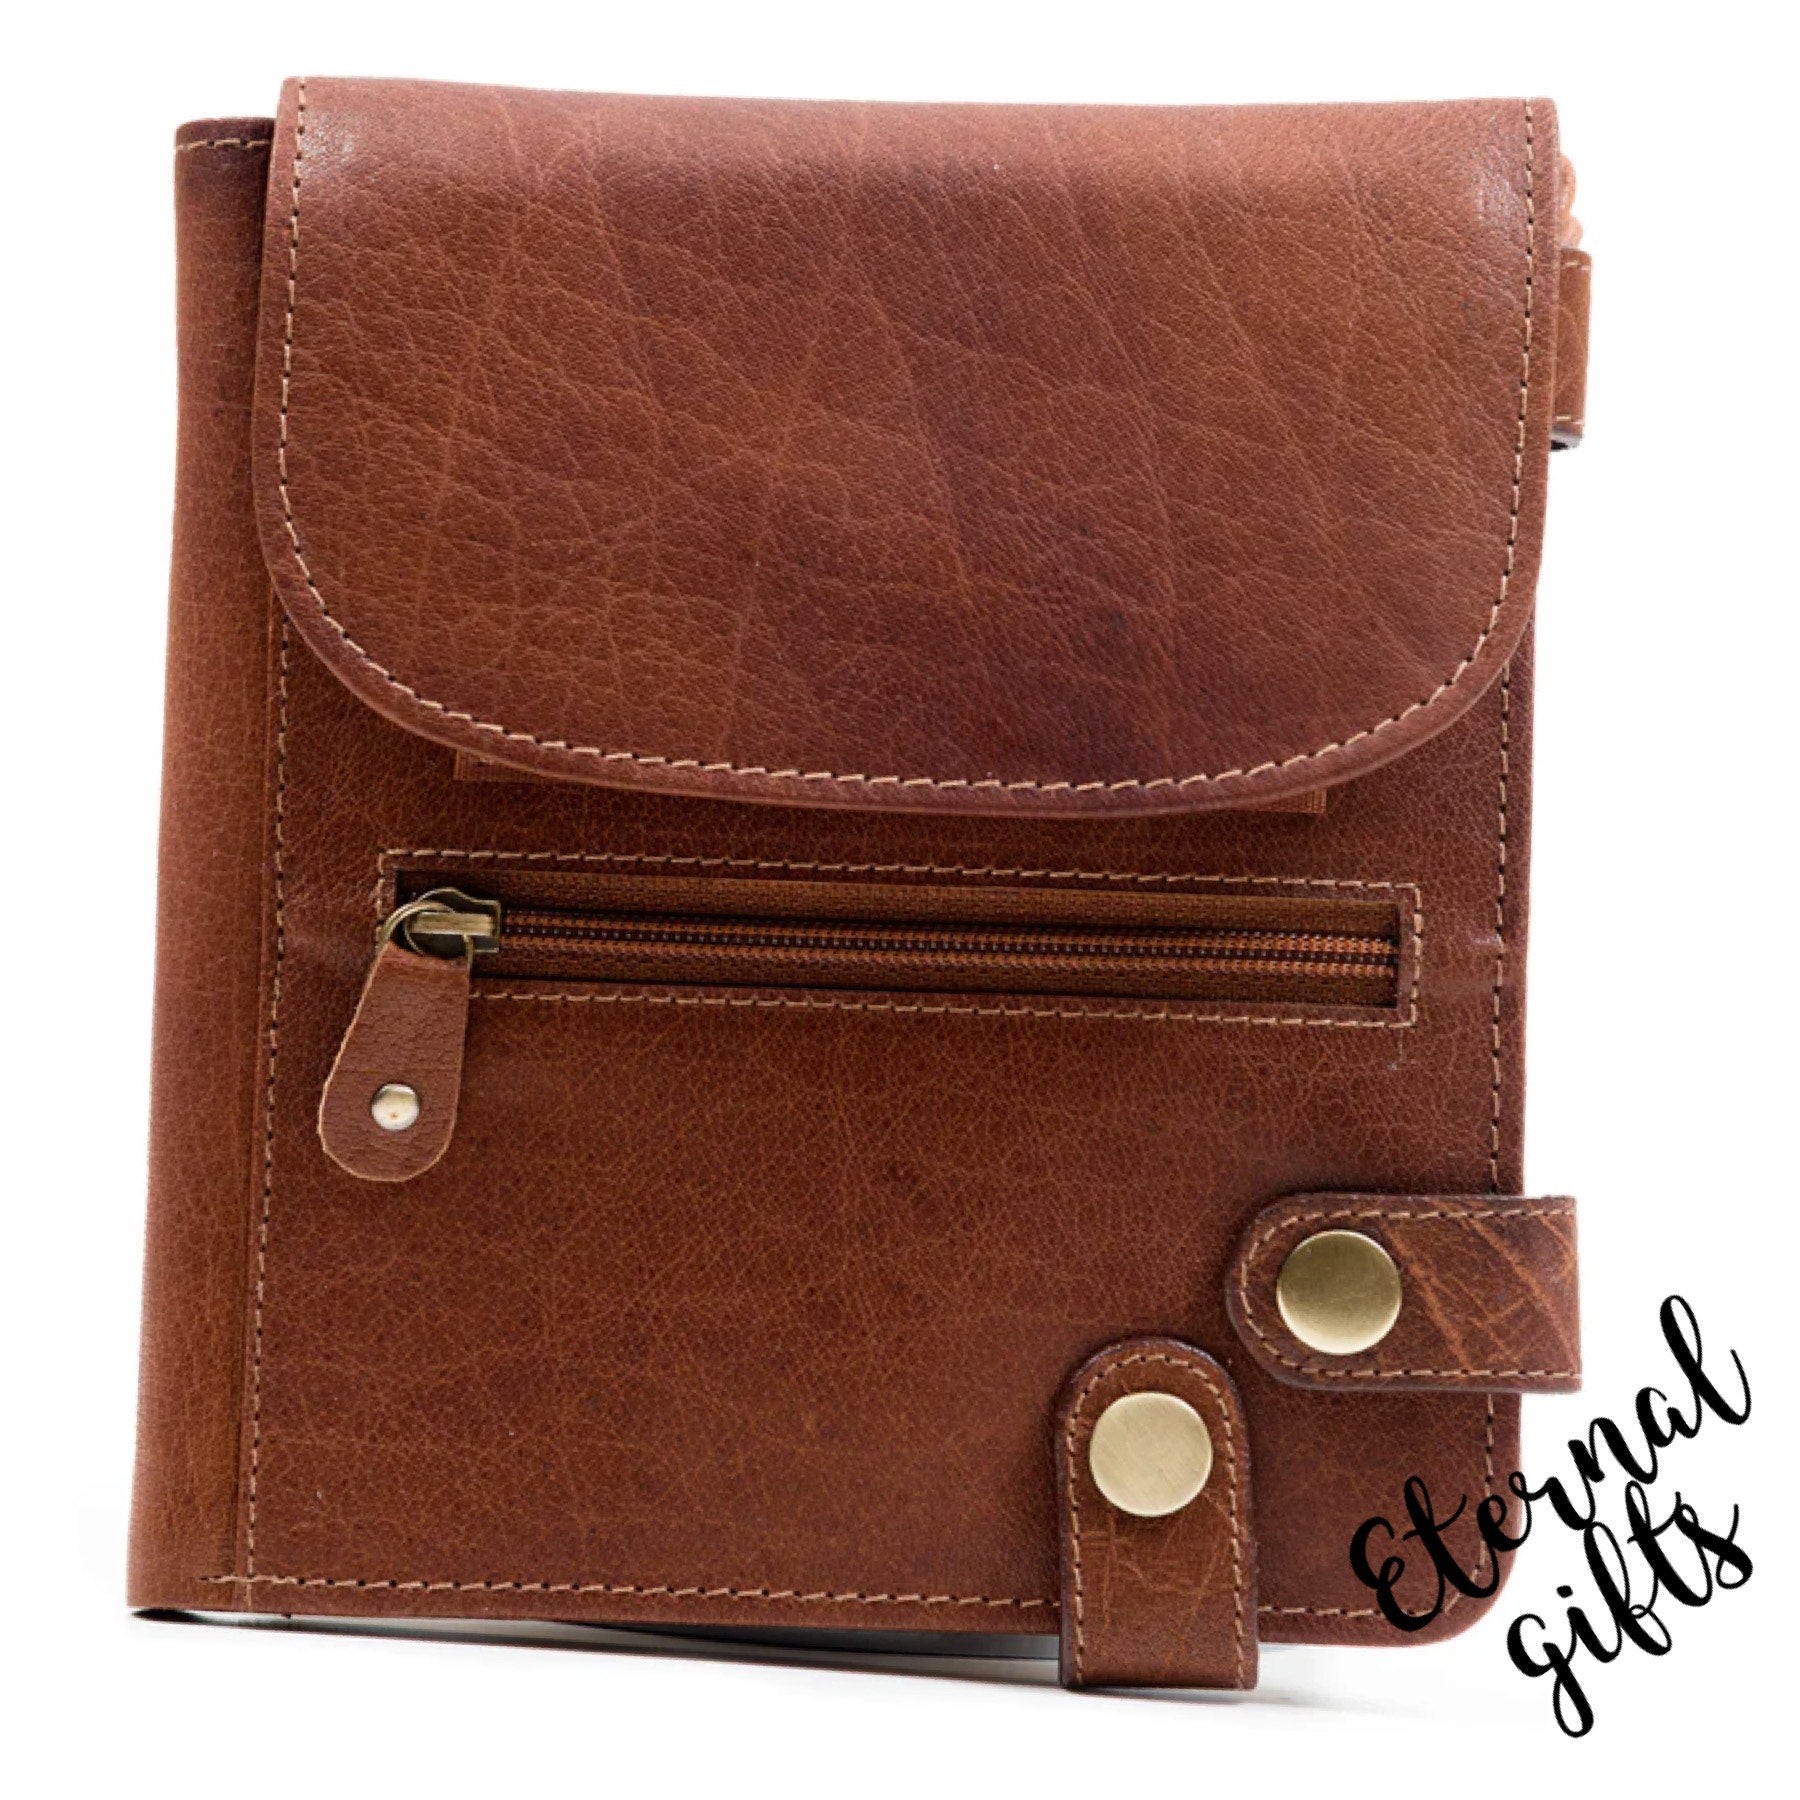 Leather Security Purse Tan - Tinnakeenly Leathers